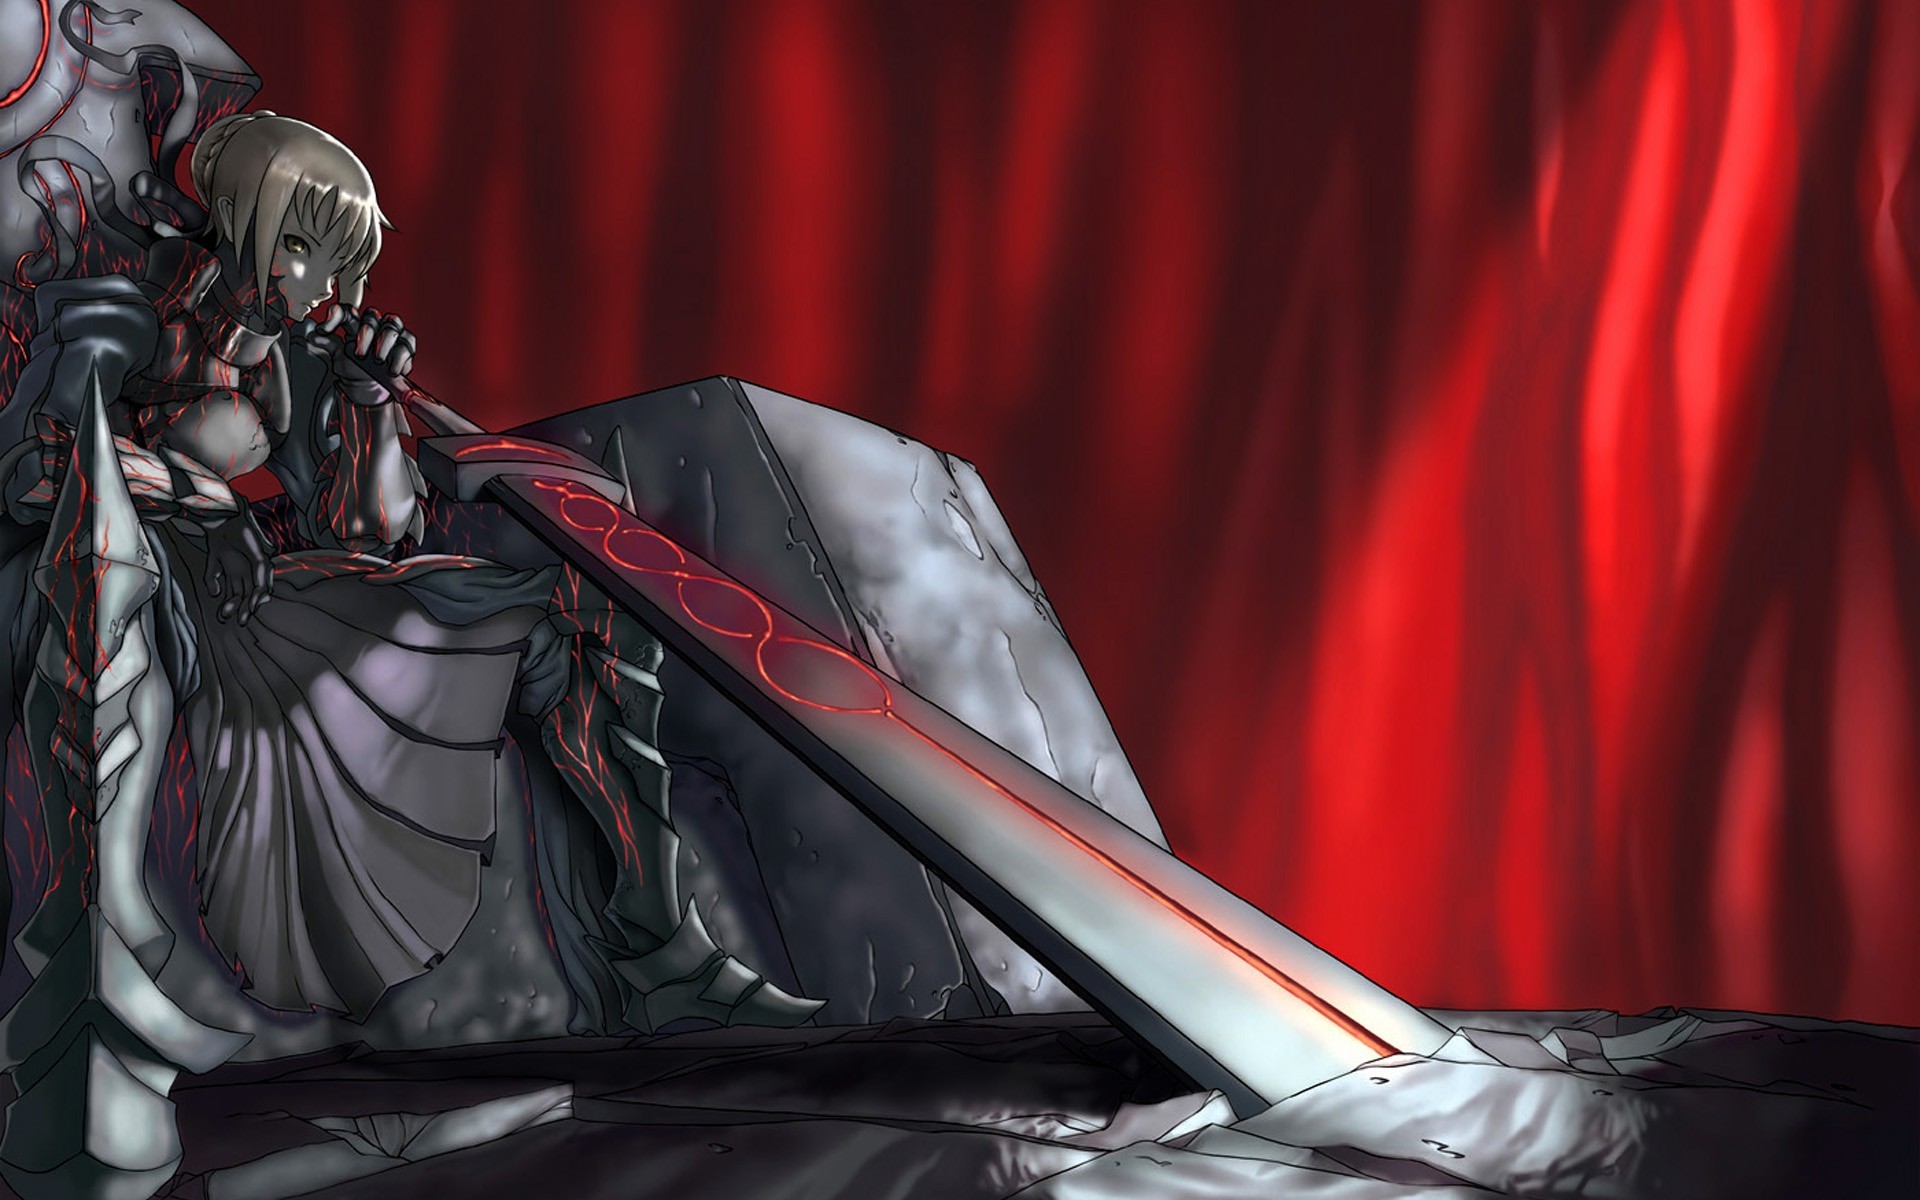 Saber   Fate stay night wallpaper 4659 1920x1200